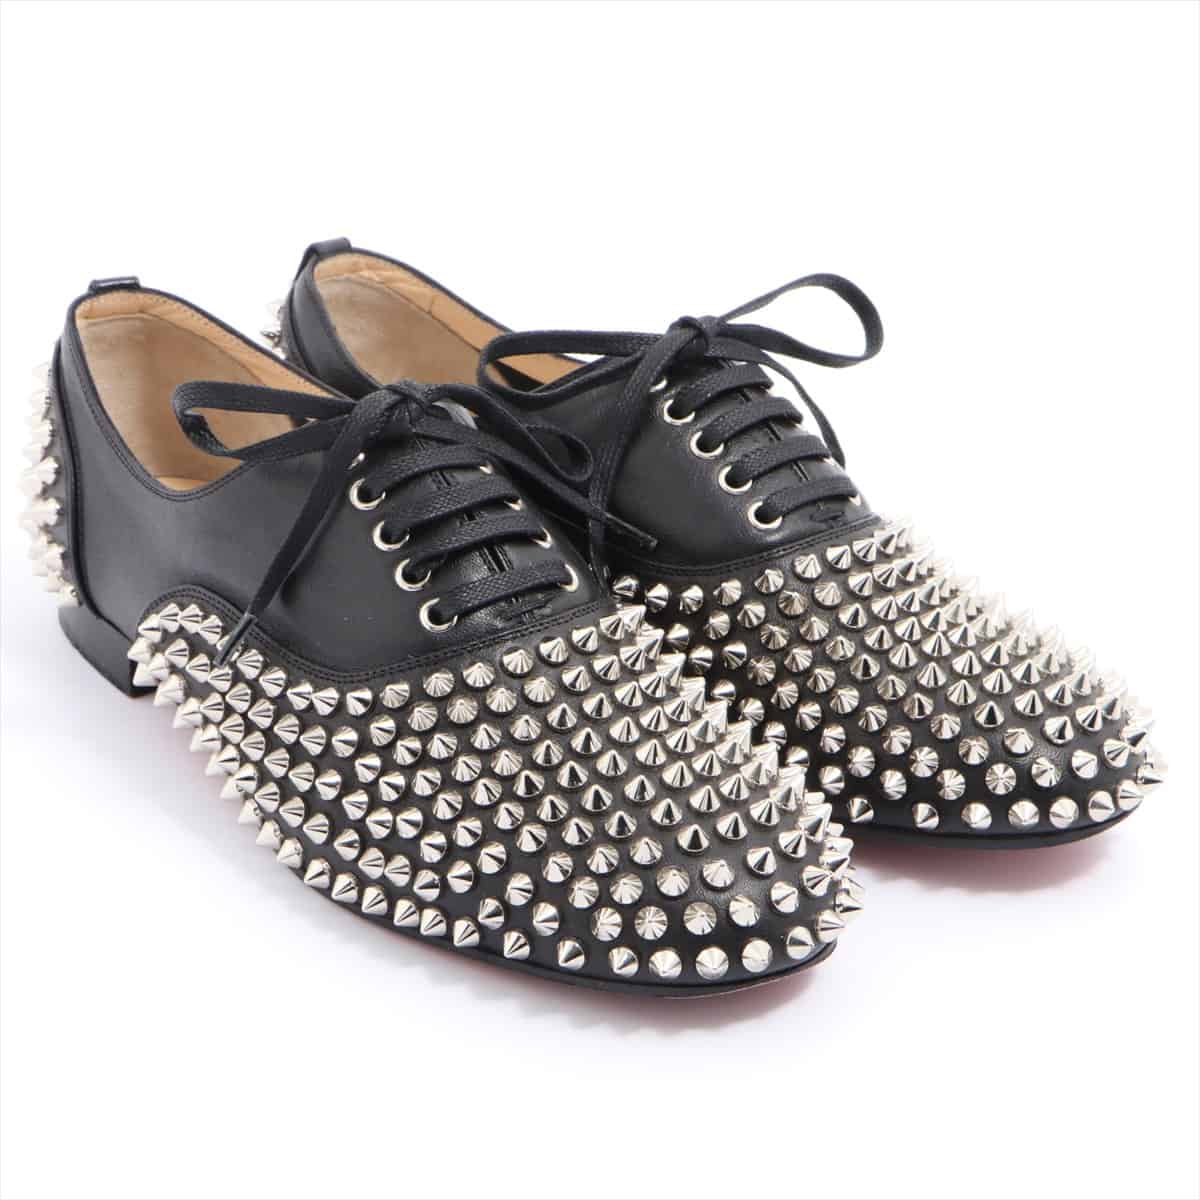 Christian Louboutin Studs Leather Shoes 37 Ladies' Black